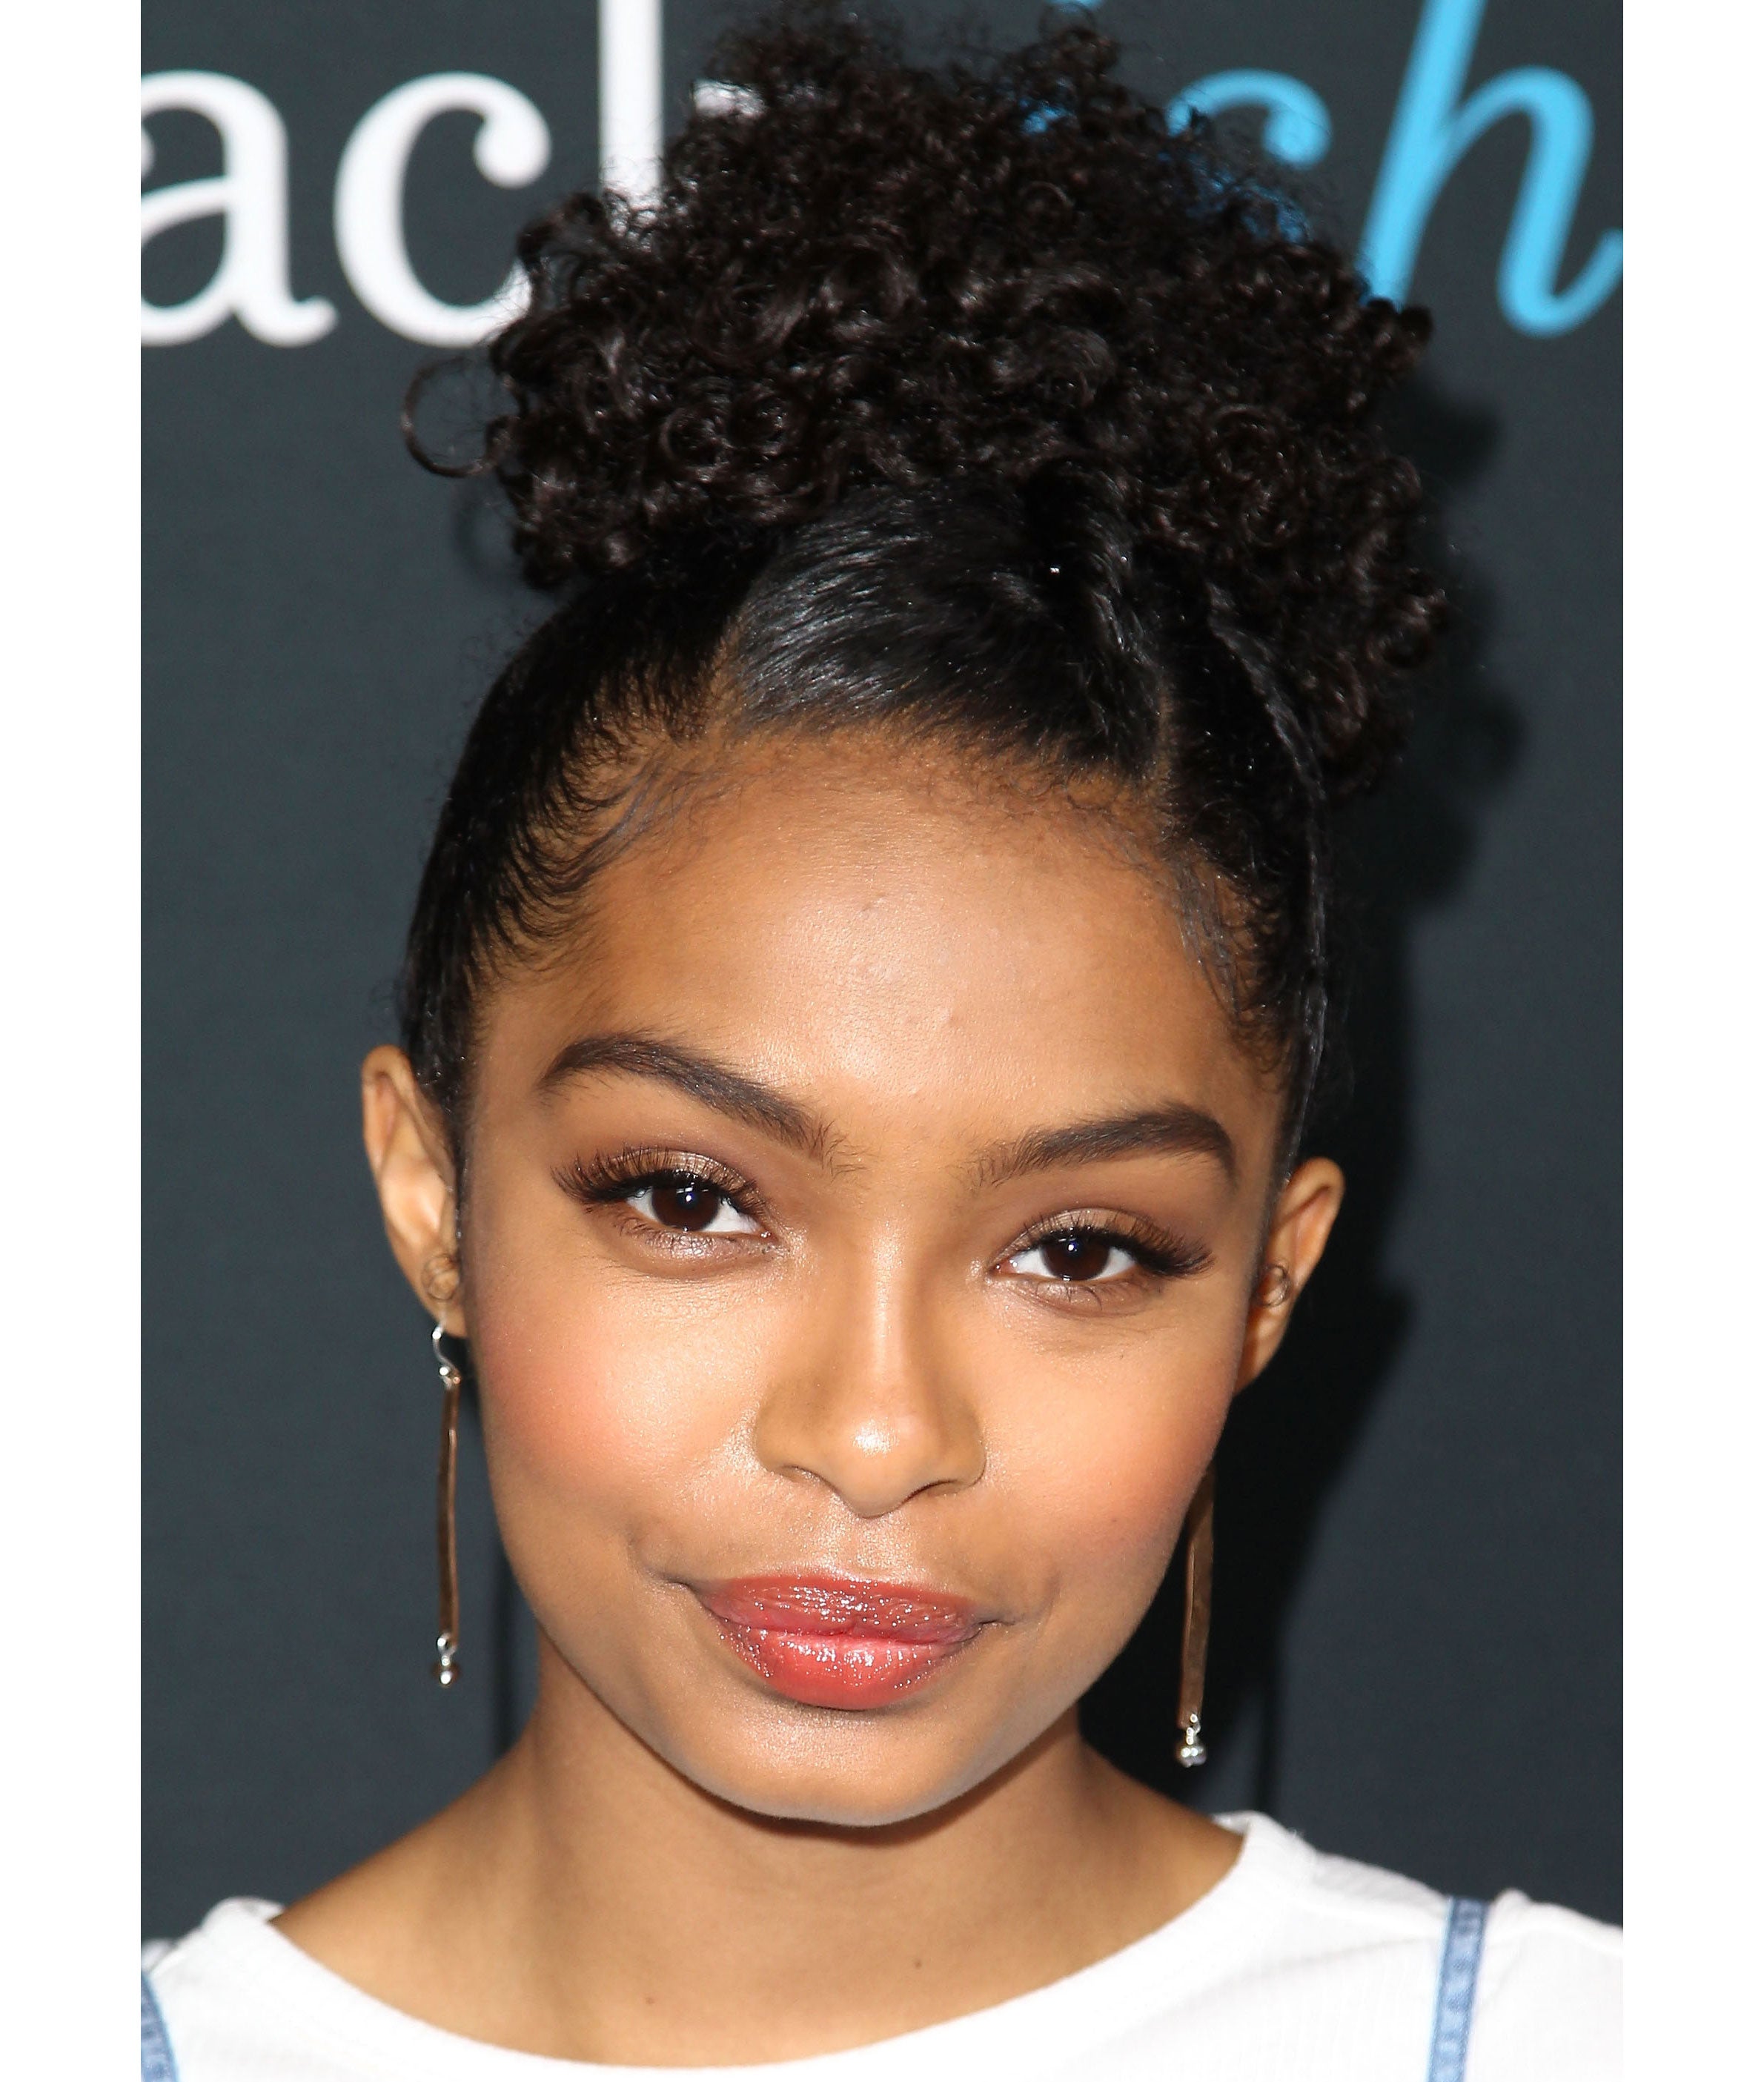 Yara Shahidi Looking For A “Nonexistent Curly Hair Emoji" To Rep Her Hair
